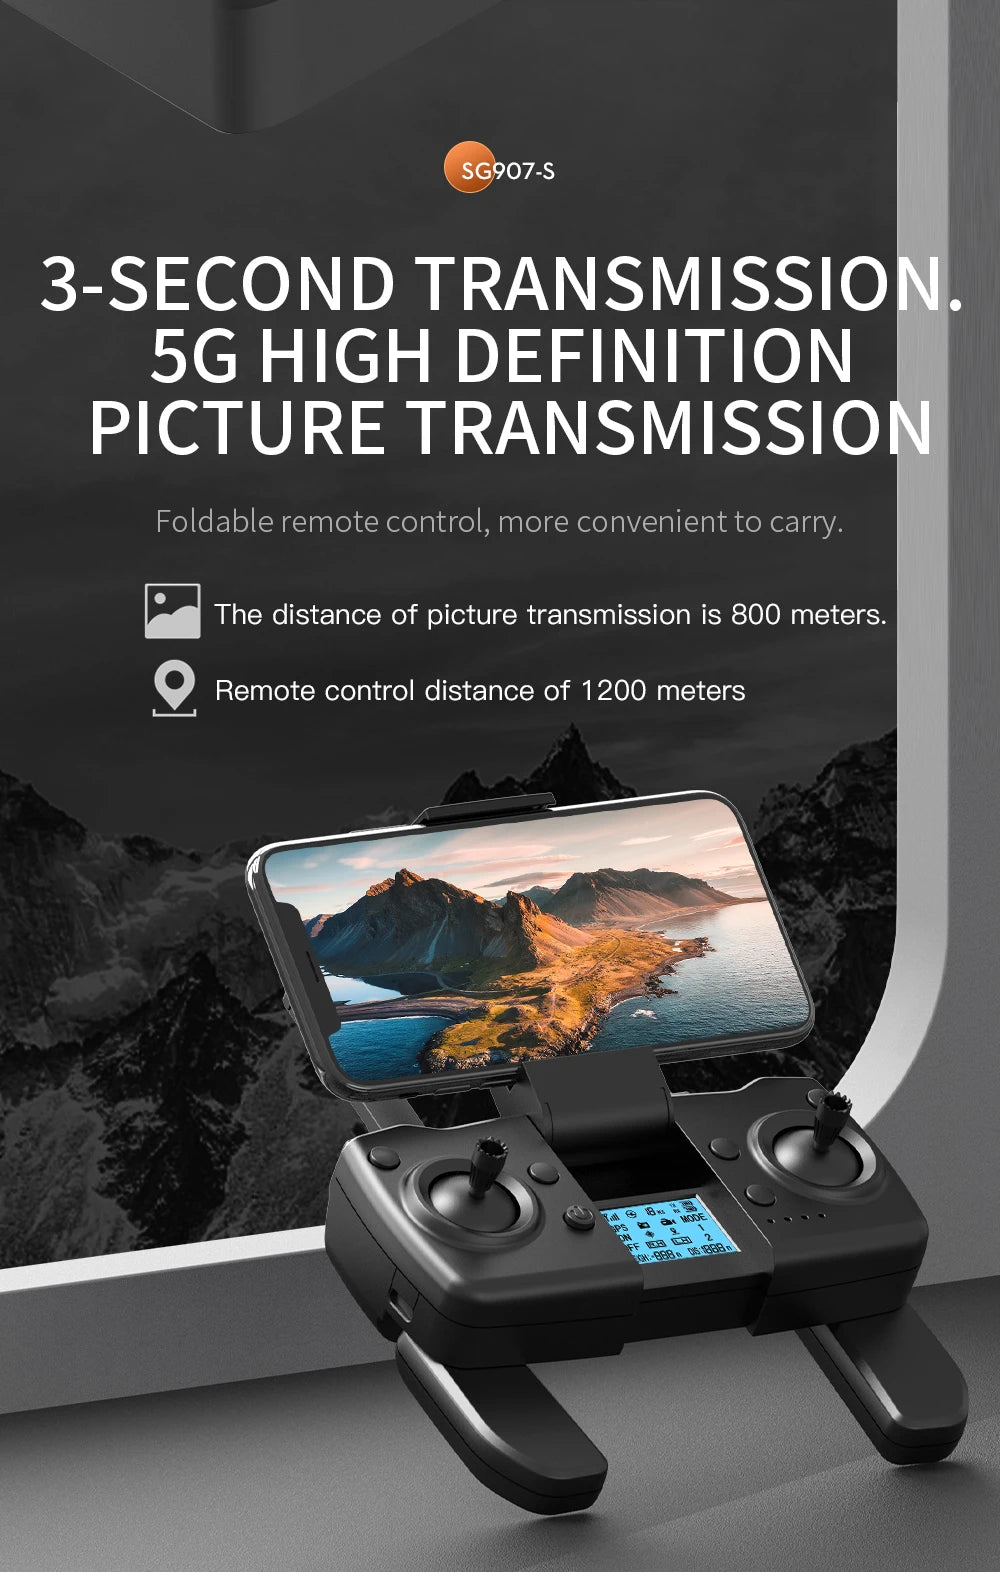 SG907S Drone, SG9O7-S 3-SECOND TRANSMISSION Foldable remote control